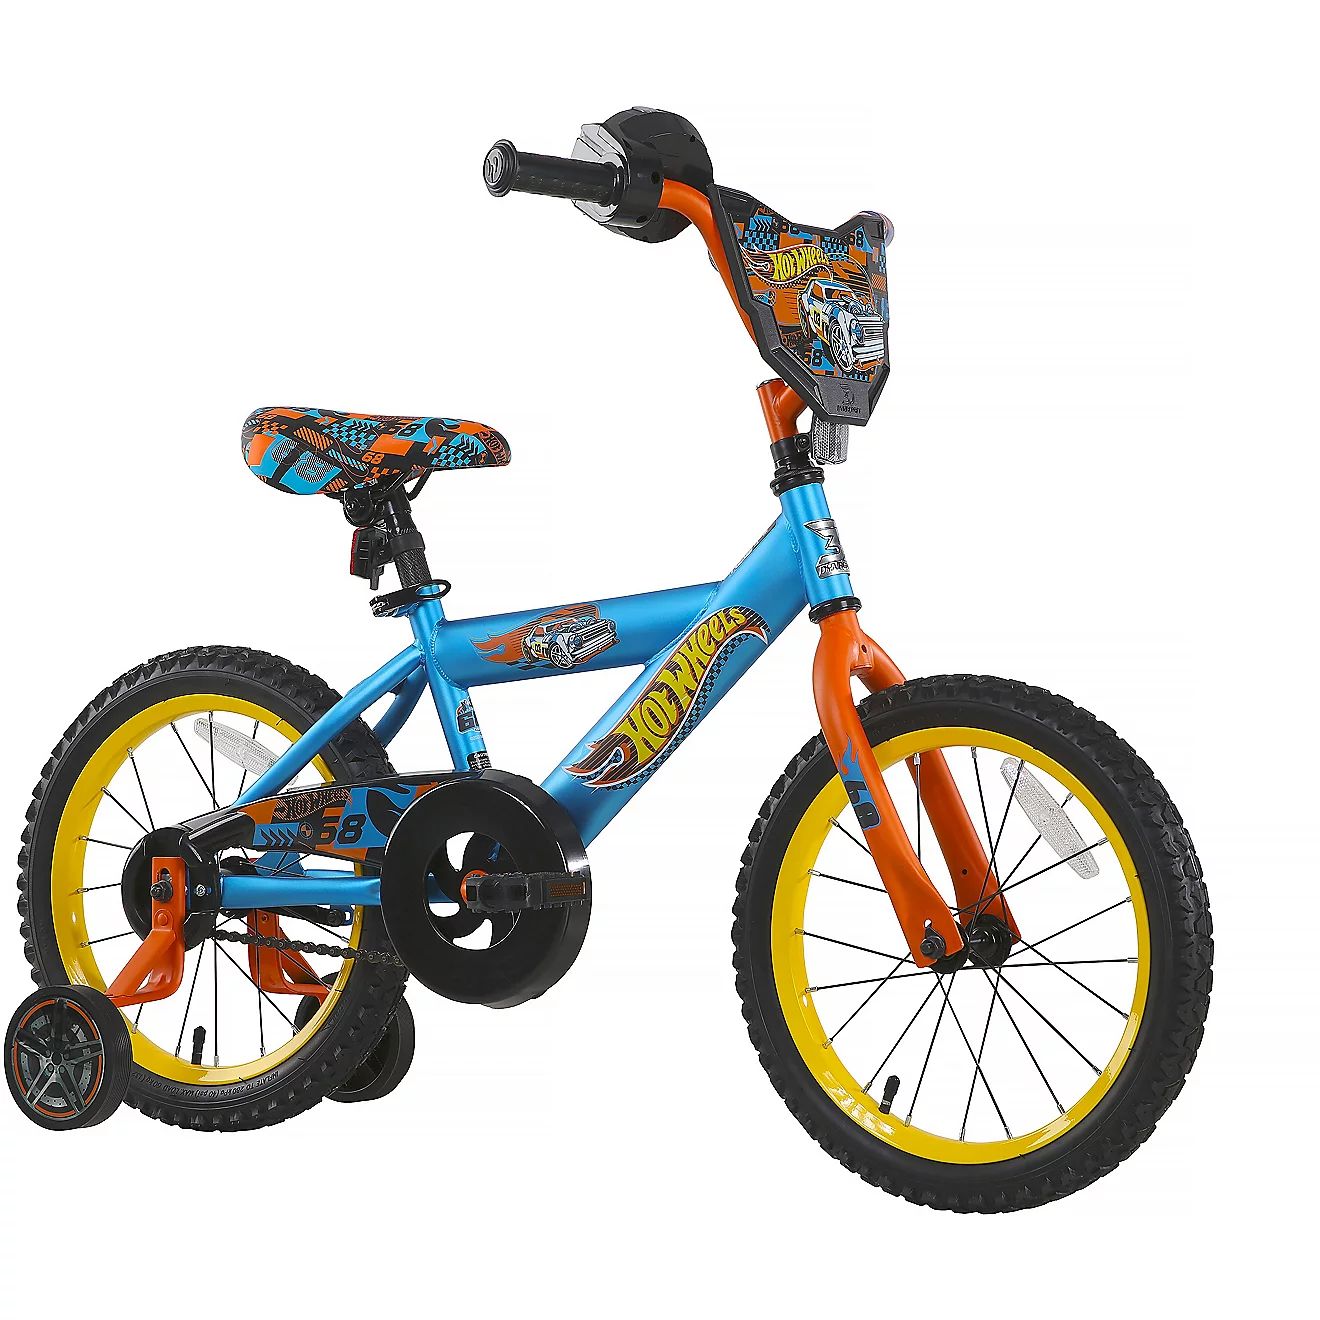 Dynacraft Boys' 16 in Hot Wheels Bicycle | Academy | Academy Sports + Outdoors